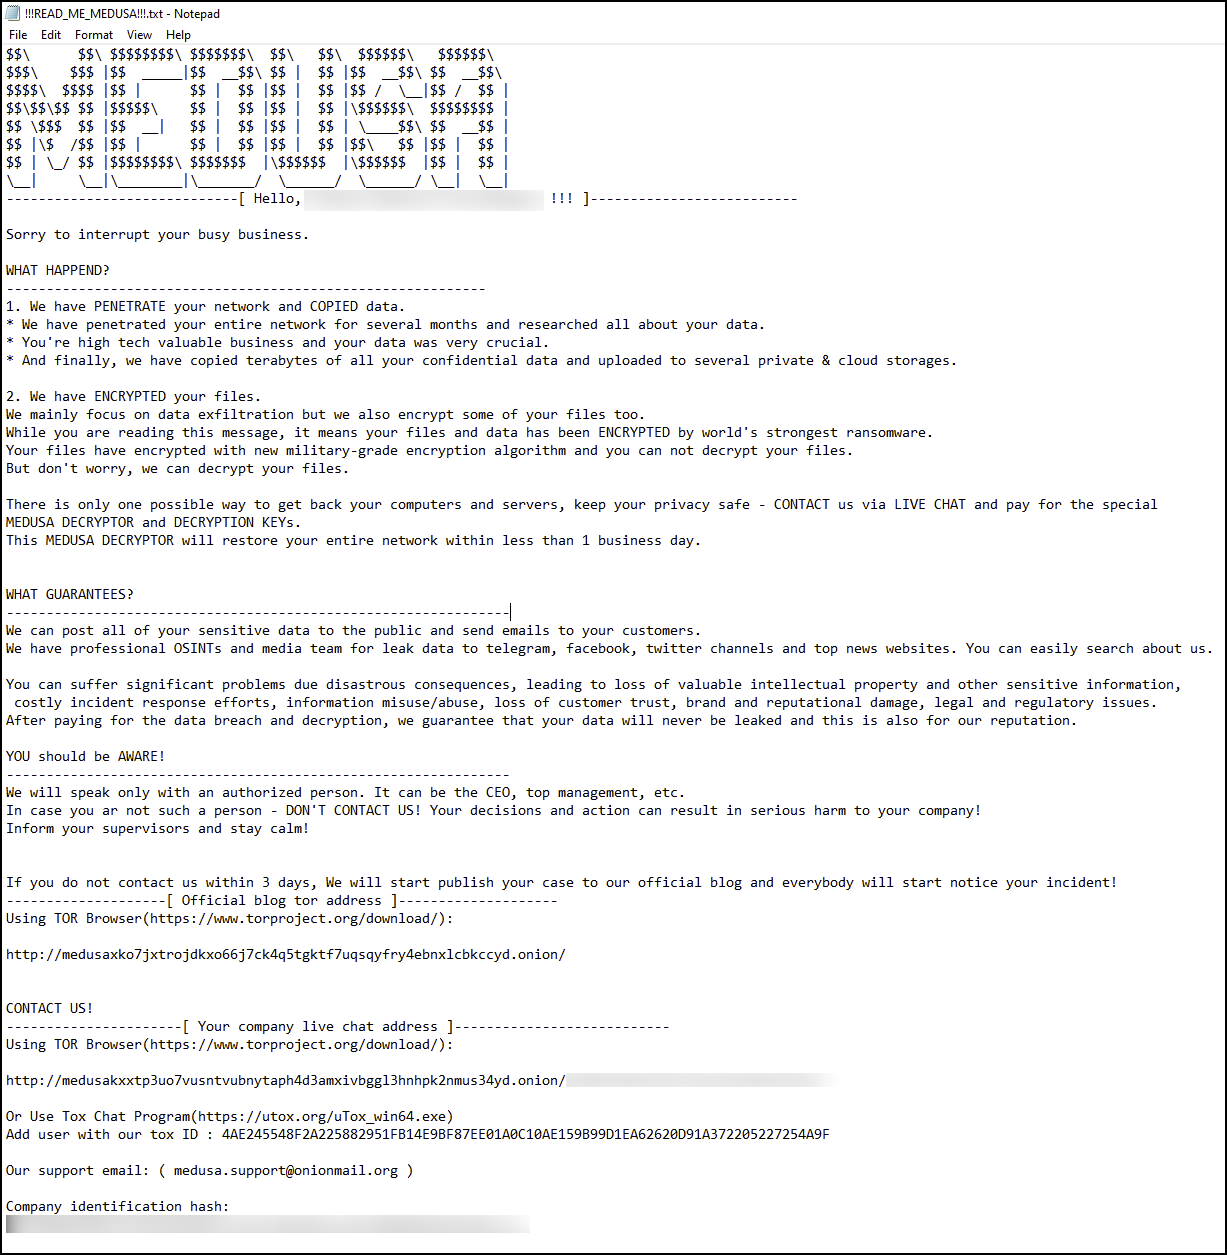 Image 25 is a screenshot of a Medusa gang ransom note. It starts with ASCII art of MEDUSA. Then there is a description of what has happened to the network and data, a list of guarantees, who to contact and how, as well as instructions on how to use TOR. Some of the information has been redacted. 